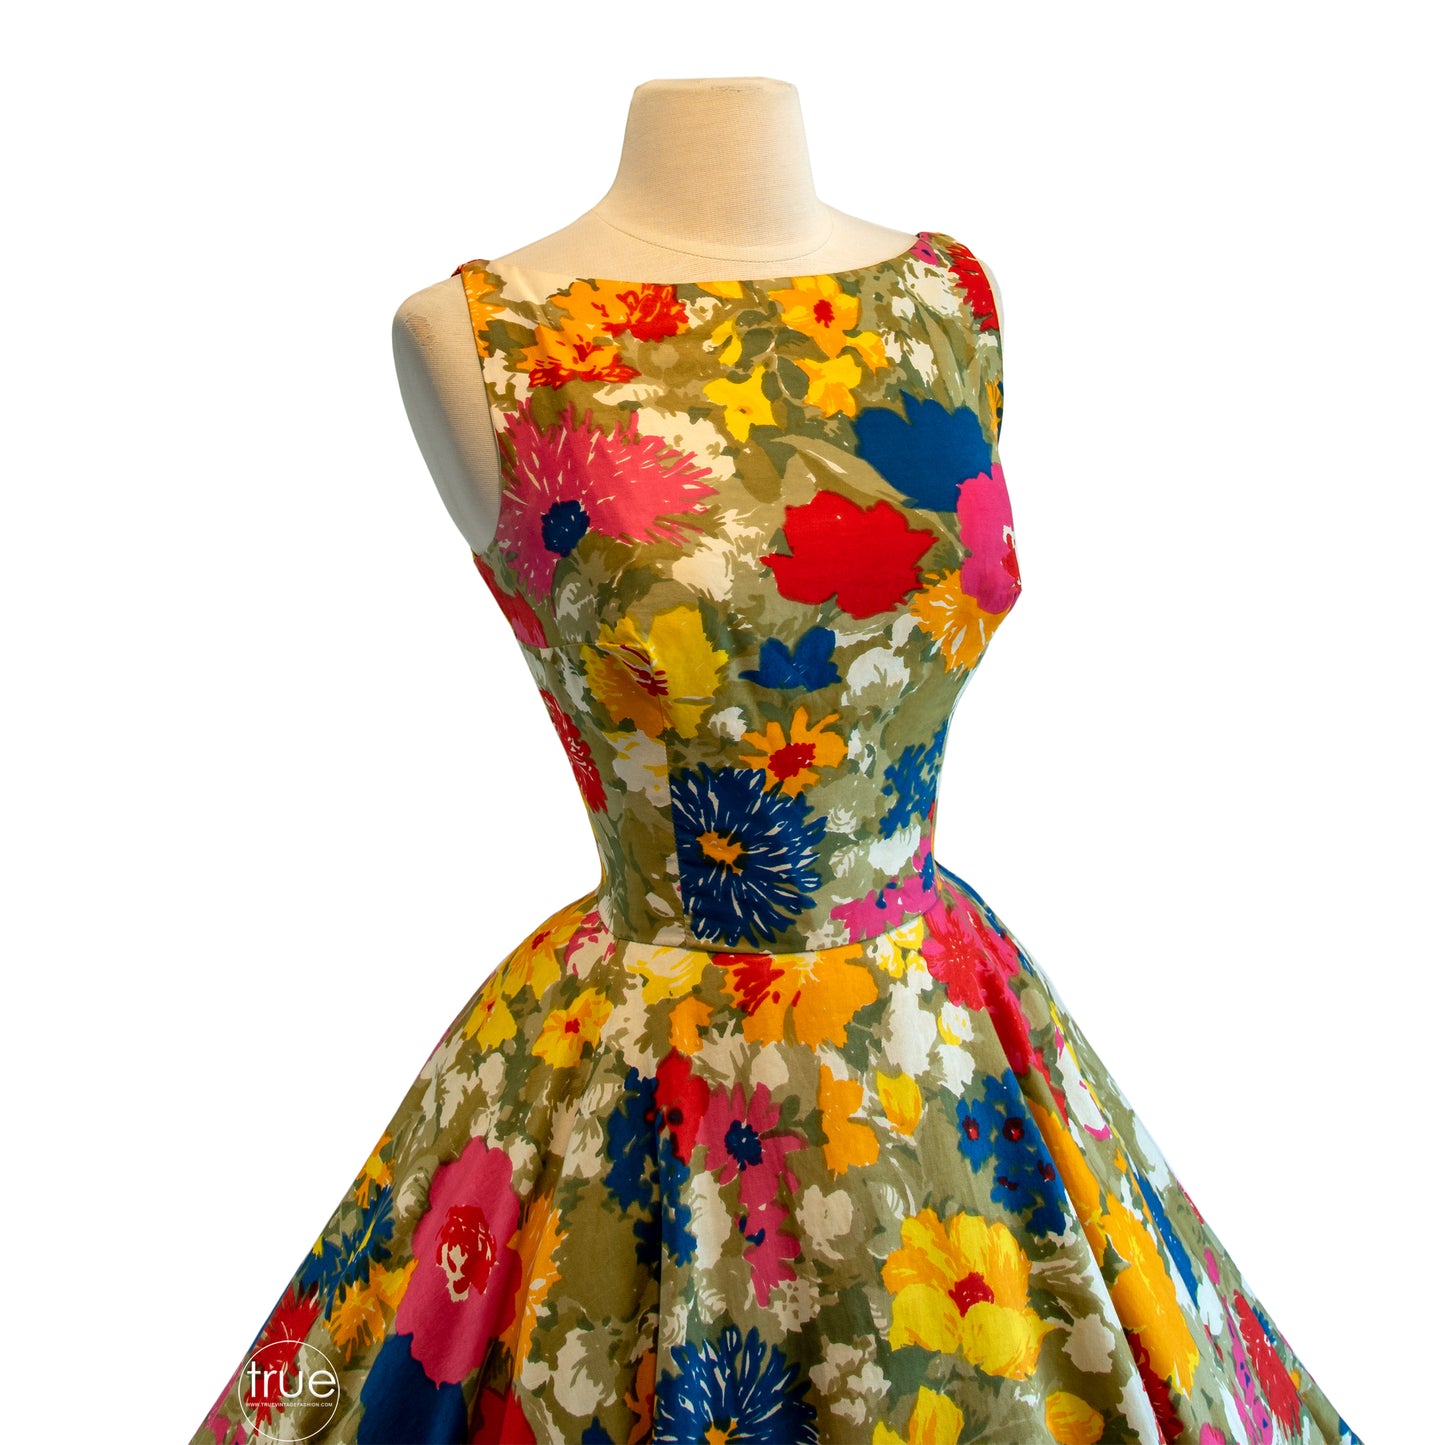 vintage 1950's dress ...gorgeous MARYON's fifth avenue spring floral explosion circle skirt dress